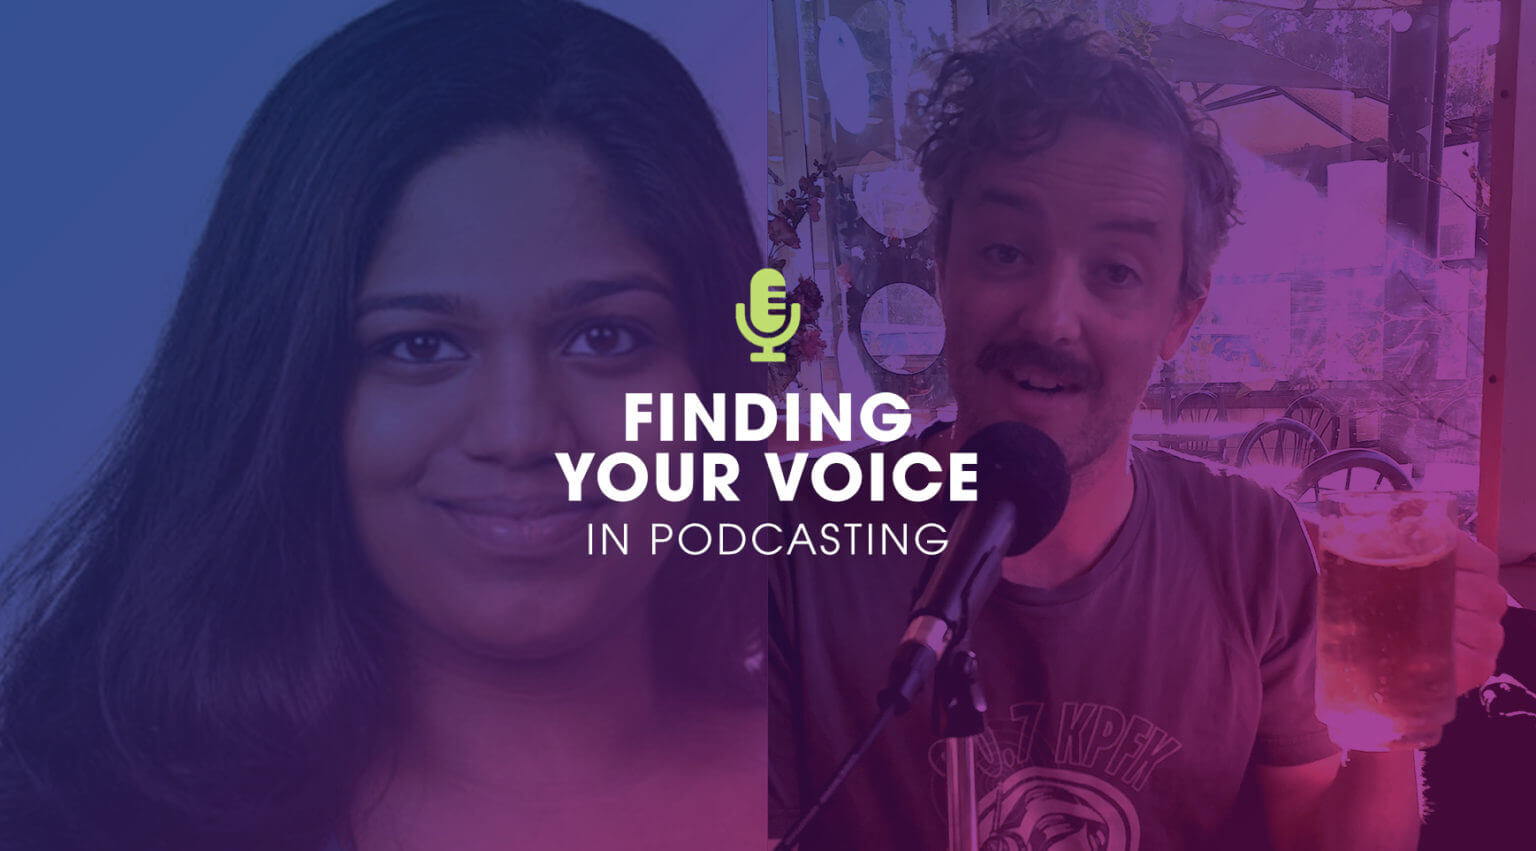 9 Podcasters Explain How They Found Their Voice